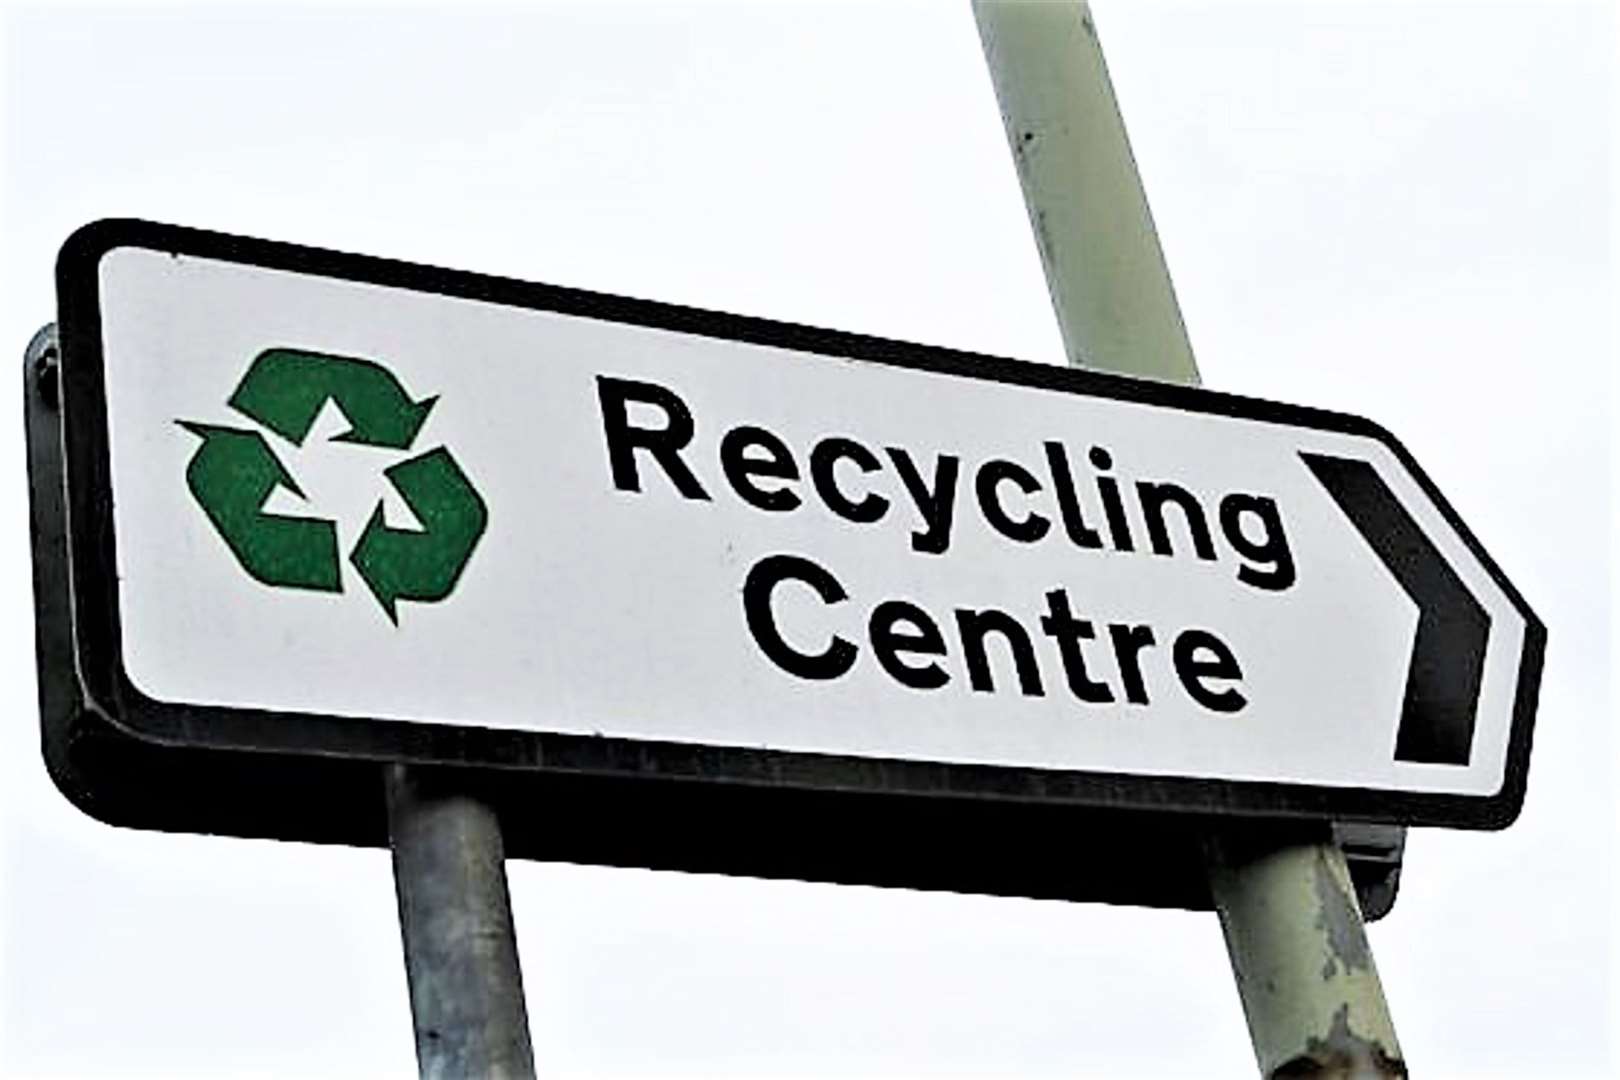 Council recycling centres are closing across Caithness and the rest of the Highland region.